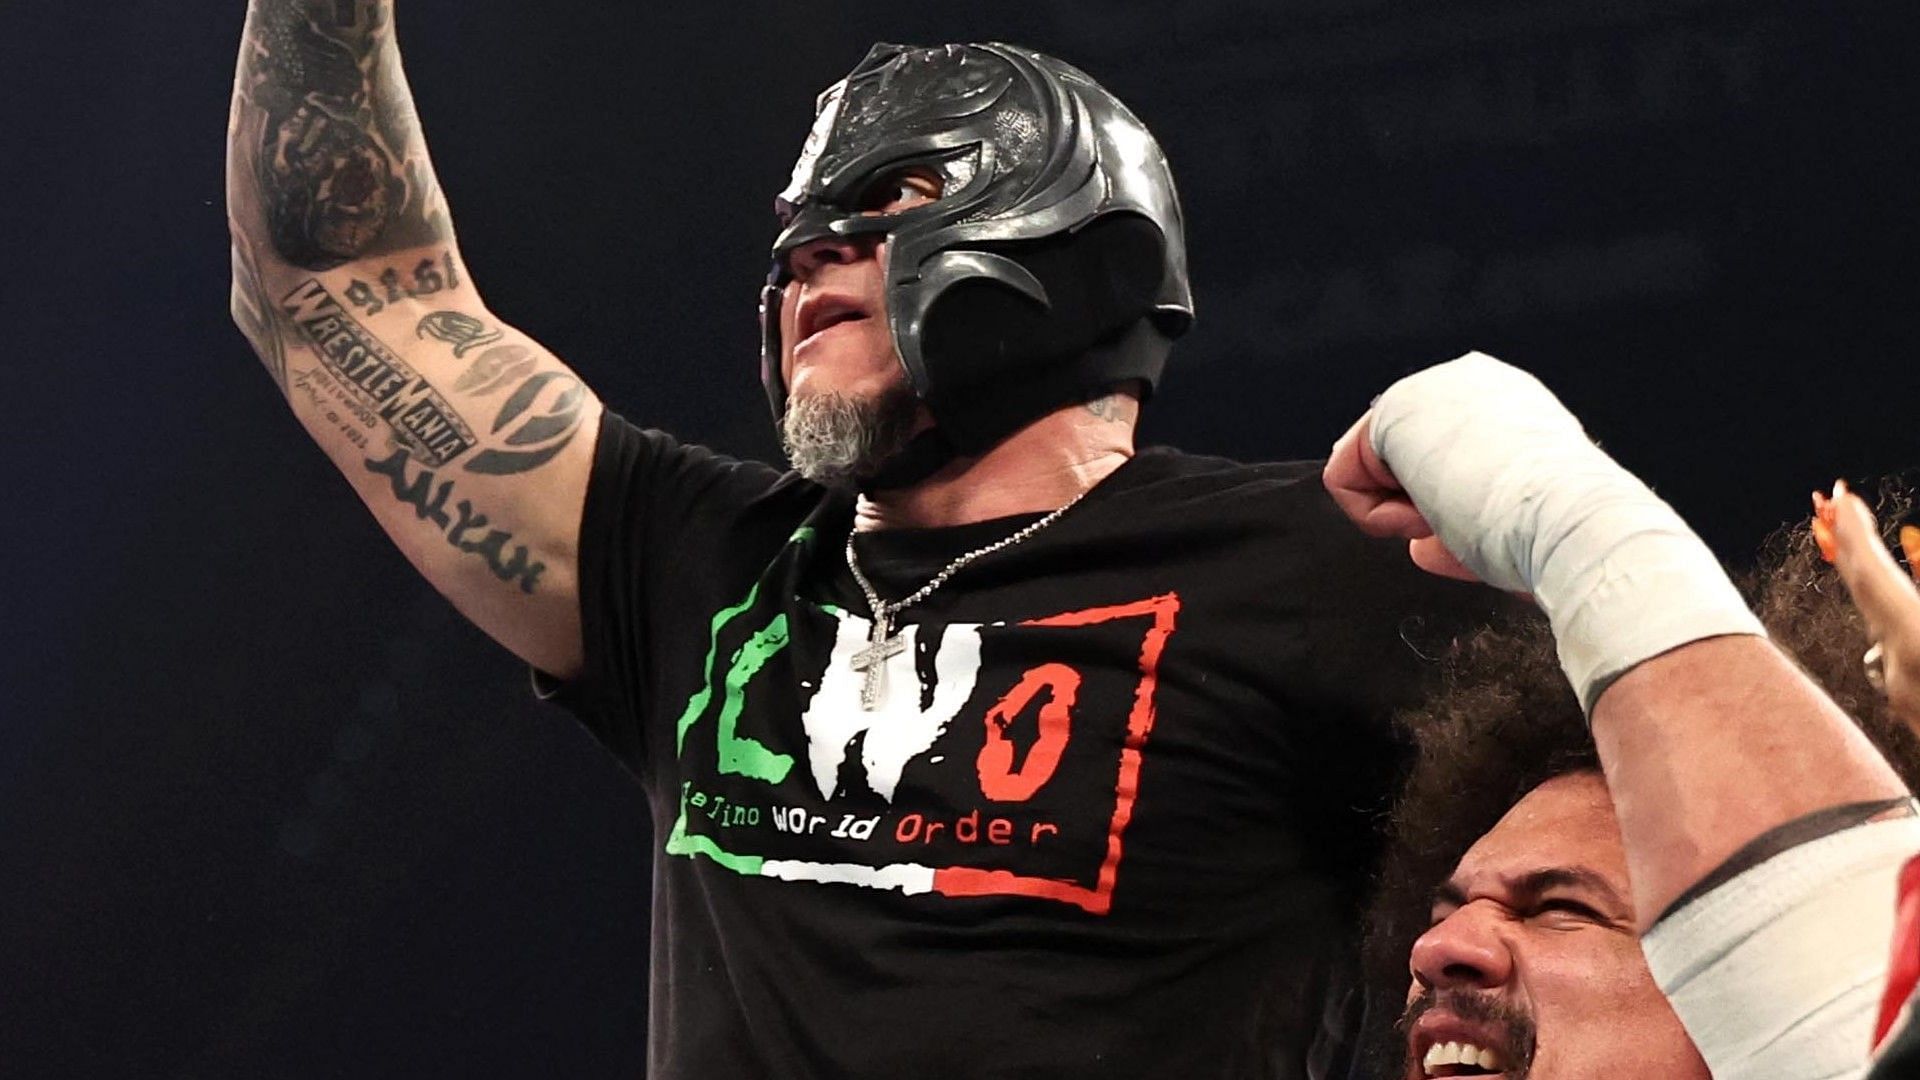 Rey Mysterio insulted as another popular star gets mocked on WWE SmackDown